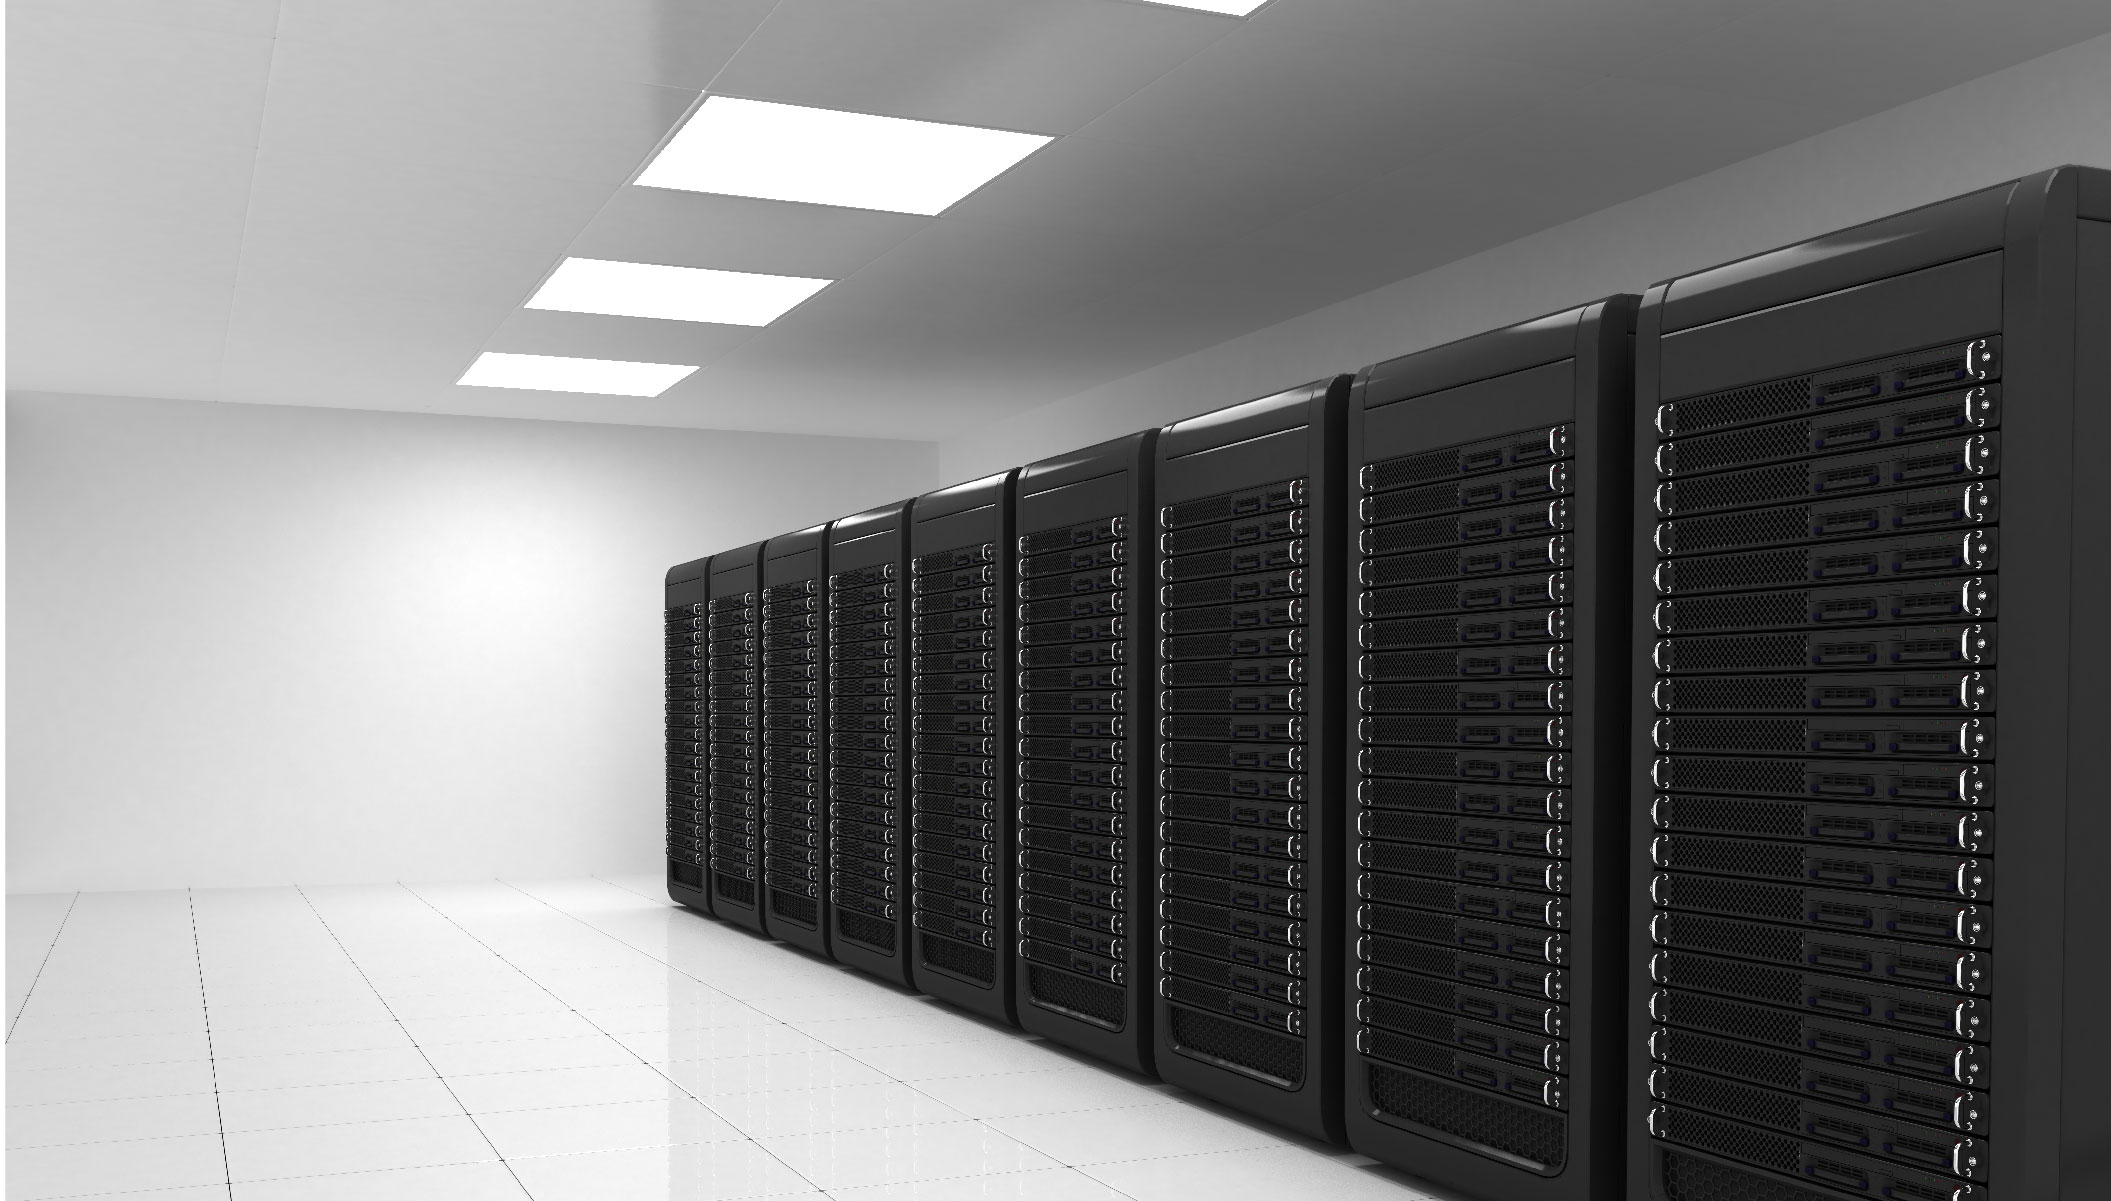 Why data centers need to be kept cool 